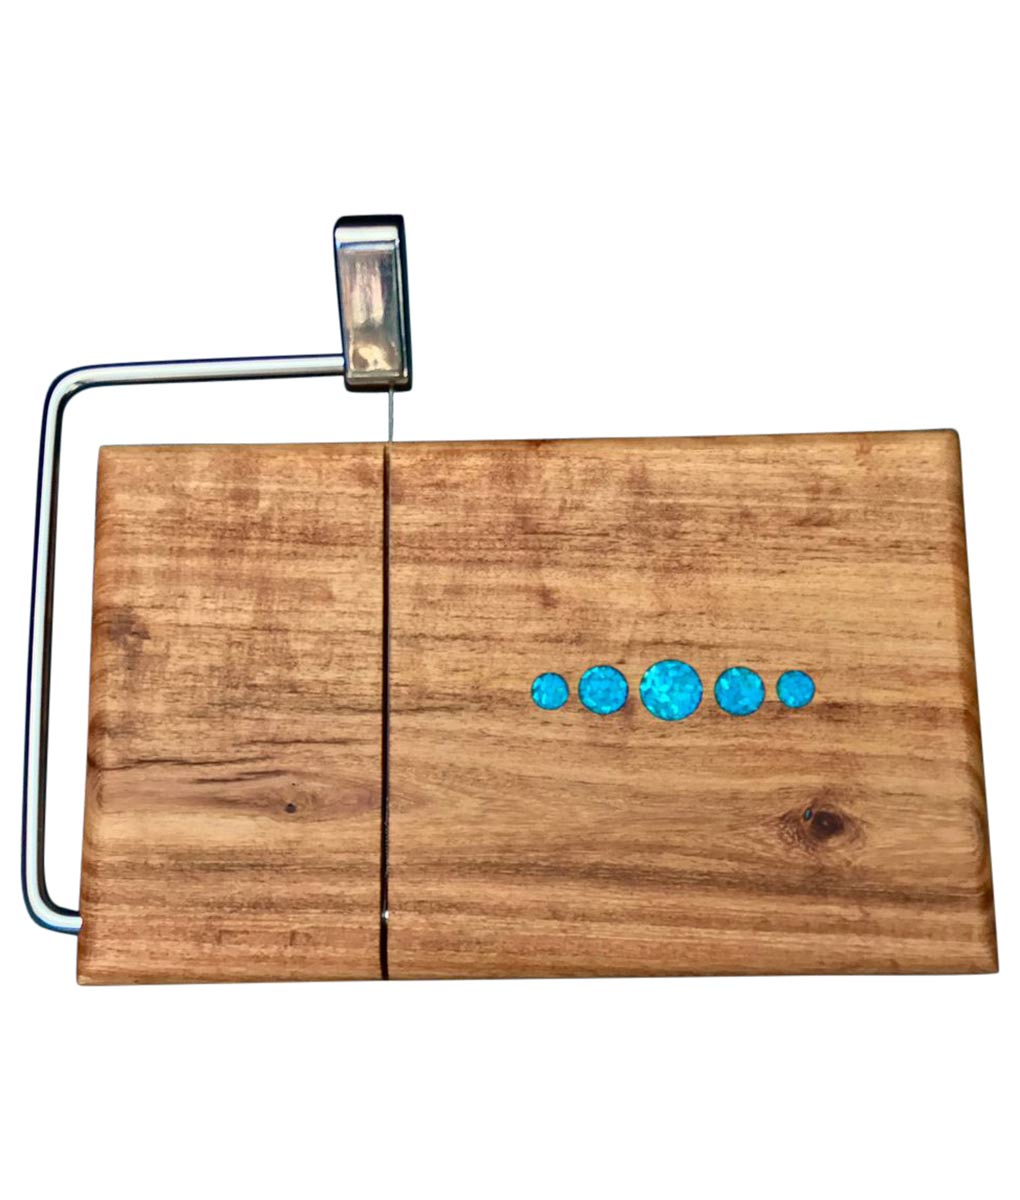 https://rusticartistry.com/wp-content/uploads/2018/11/mesquite-wood-cheese-slicer-cutting-board-with-turquoise-inlay.jpg